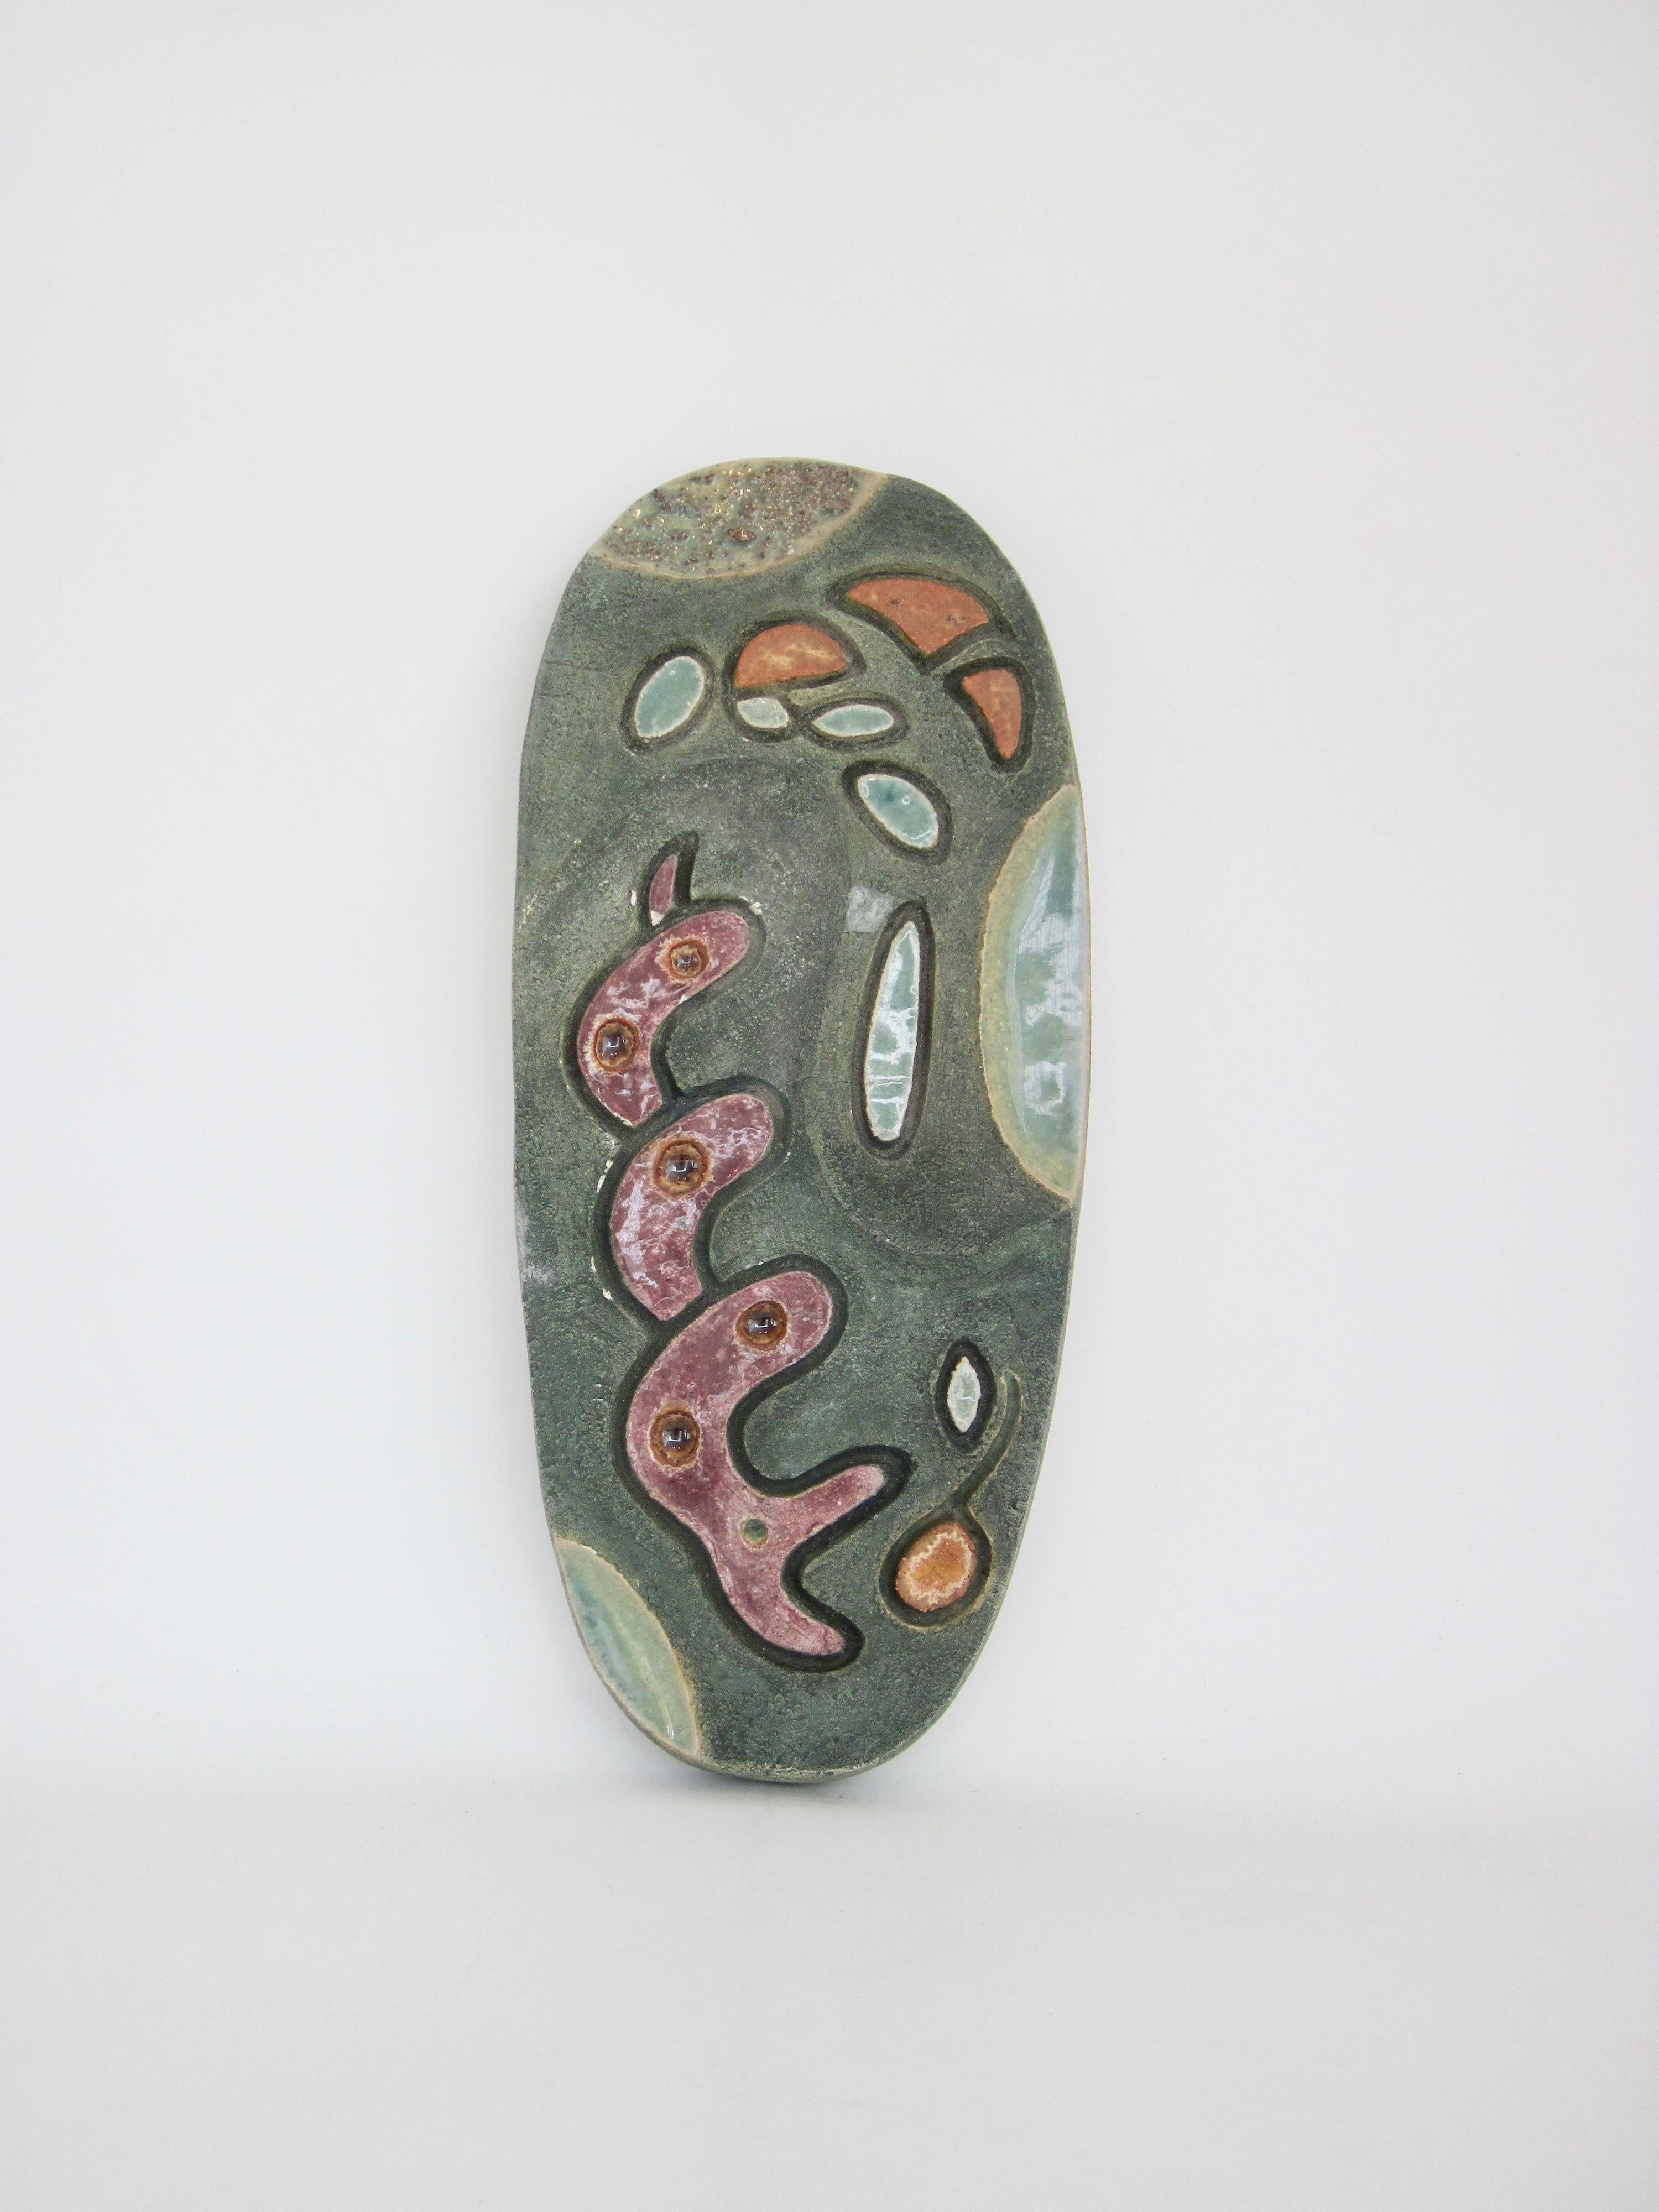 Studio made artwork drawn from organic shapes into decorative form, this spectacular green oval ceramic slab sculpture with dark hued incised outlines around colorful abstract shapes evokes a natural environment, movement, and it's continual change. 